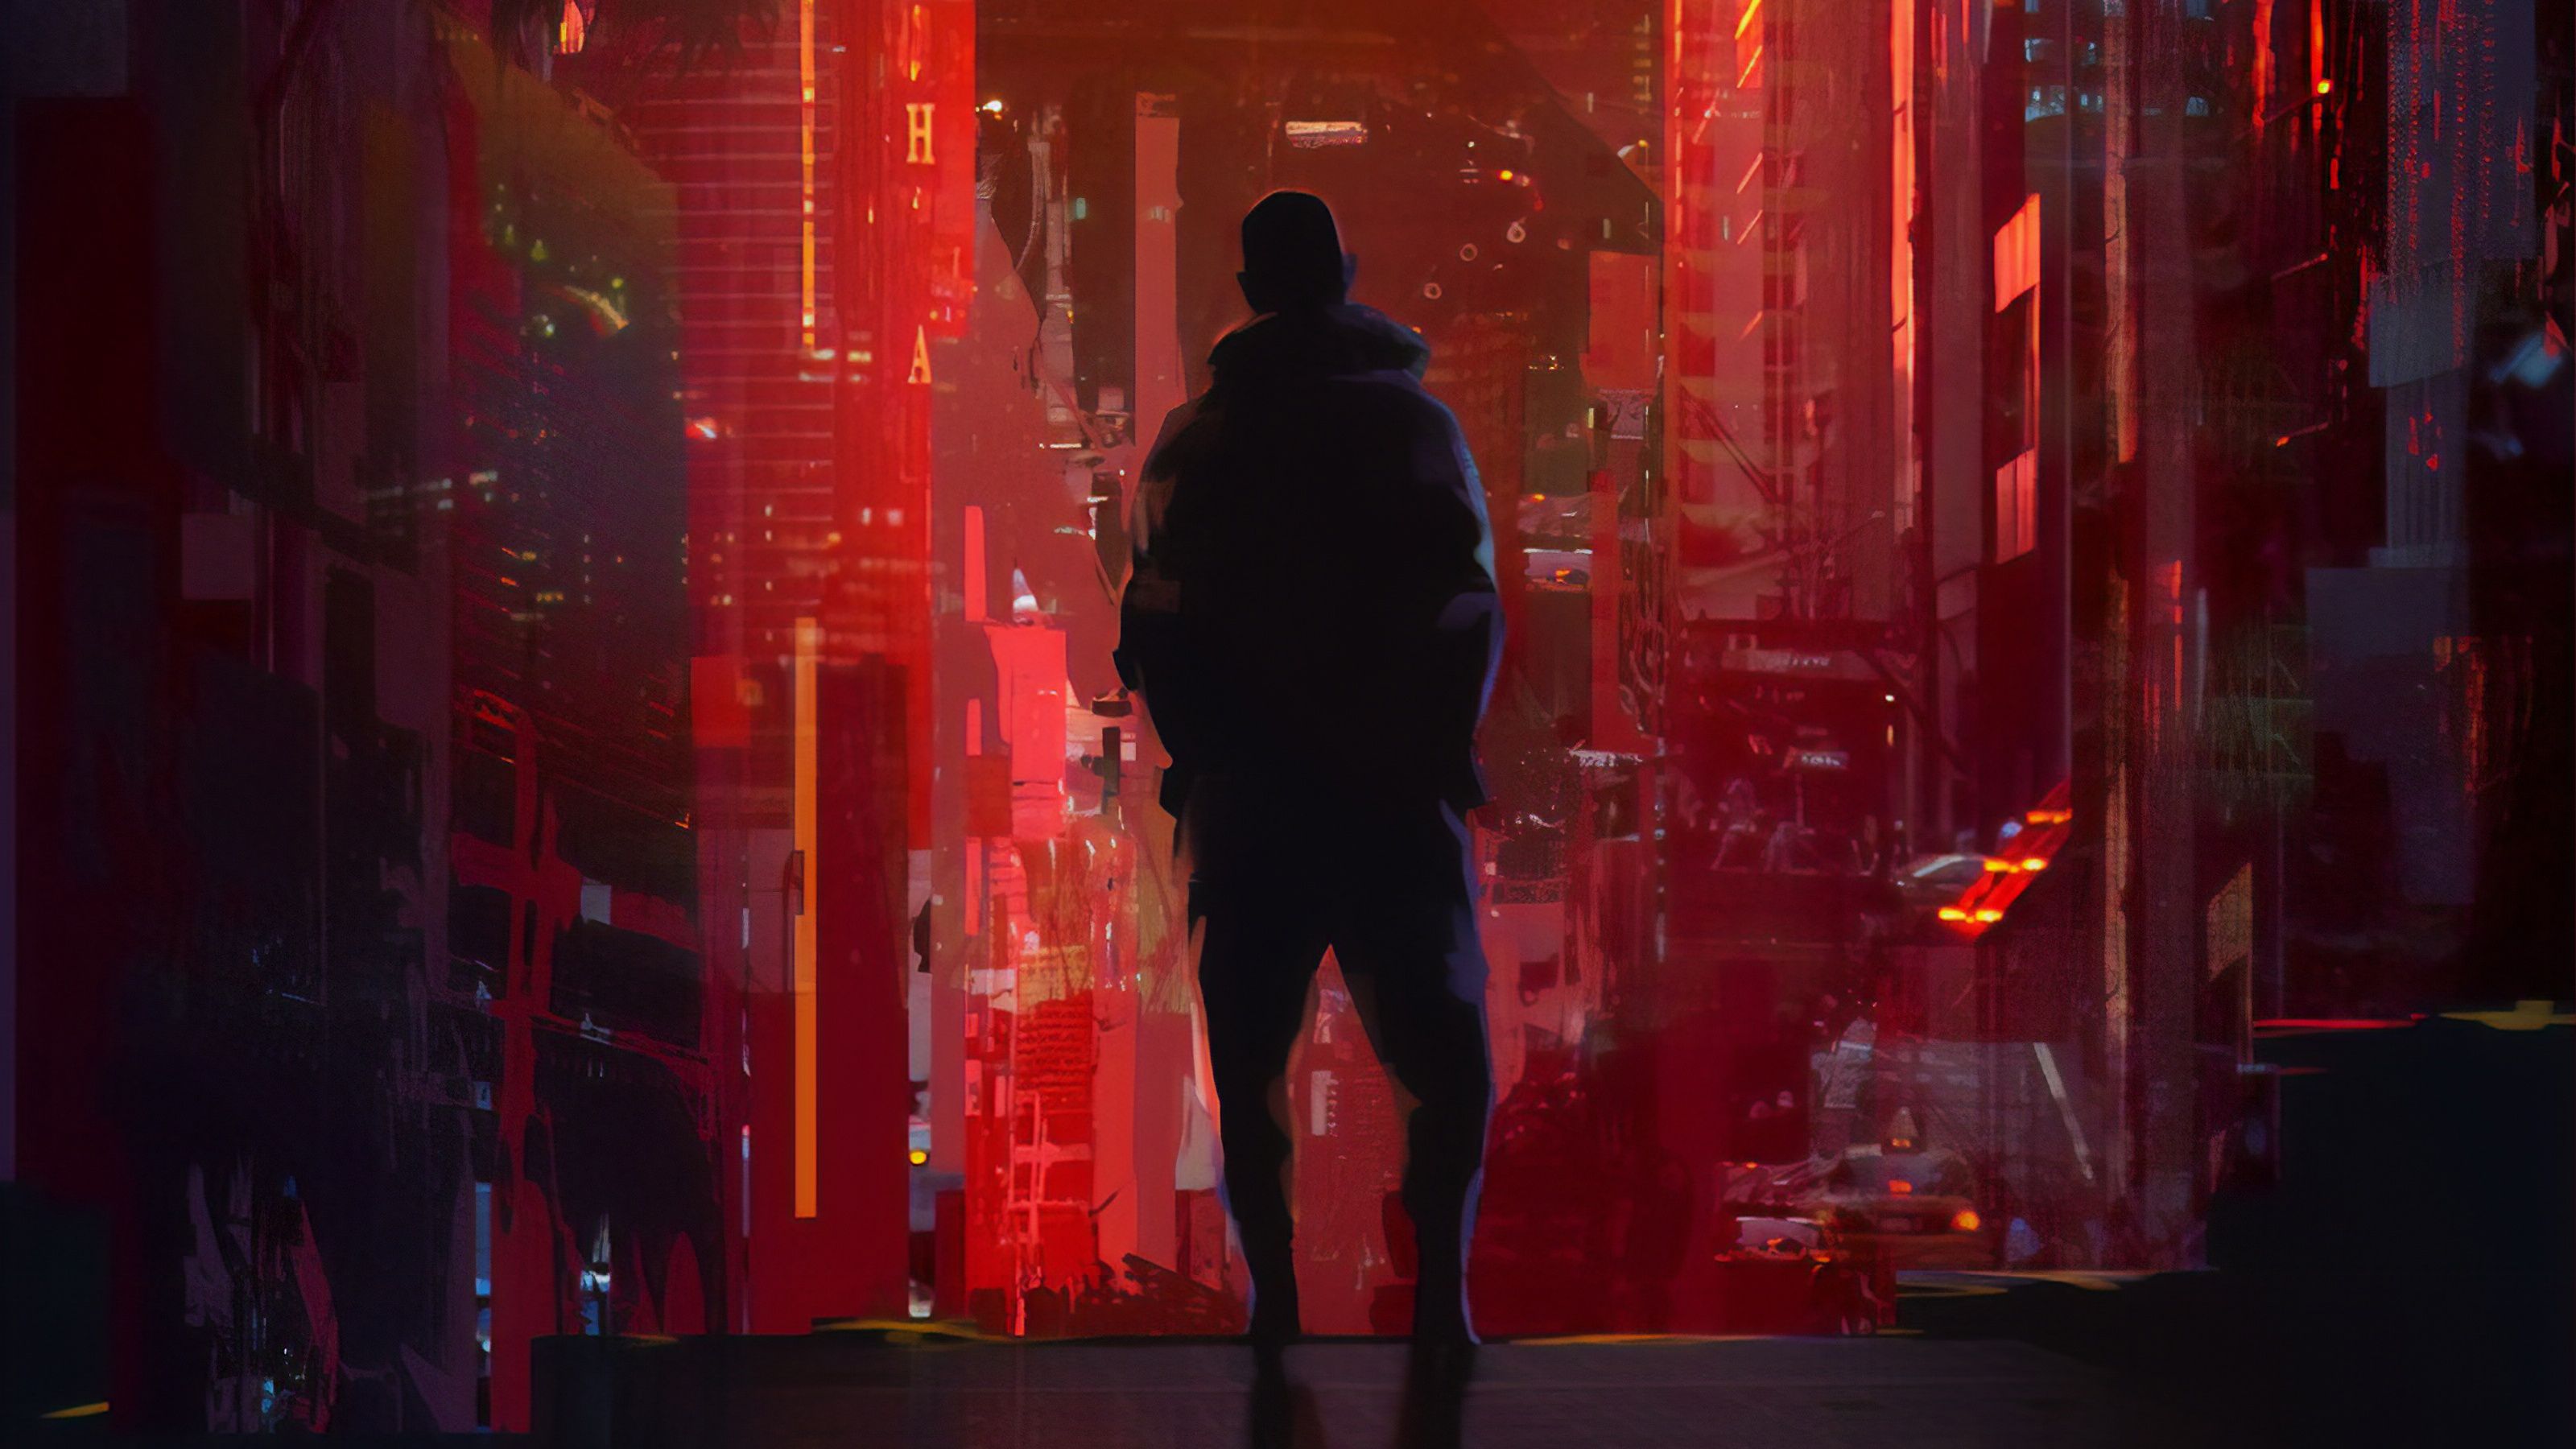 A man in a black hoody stands in a red-lit city street - California